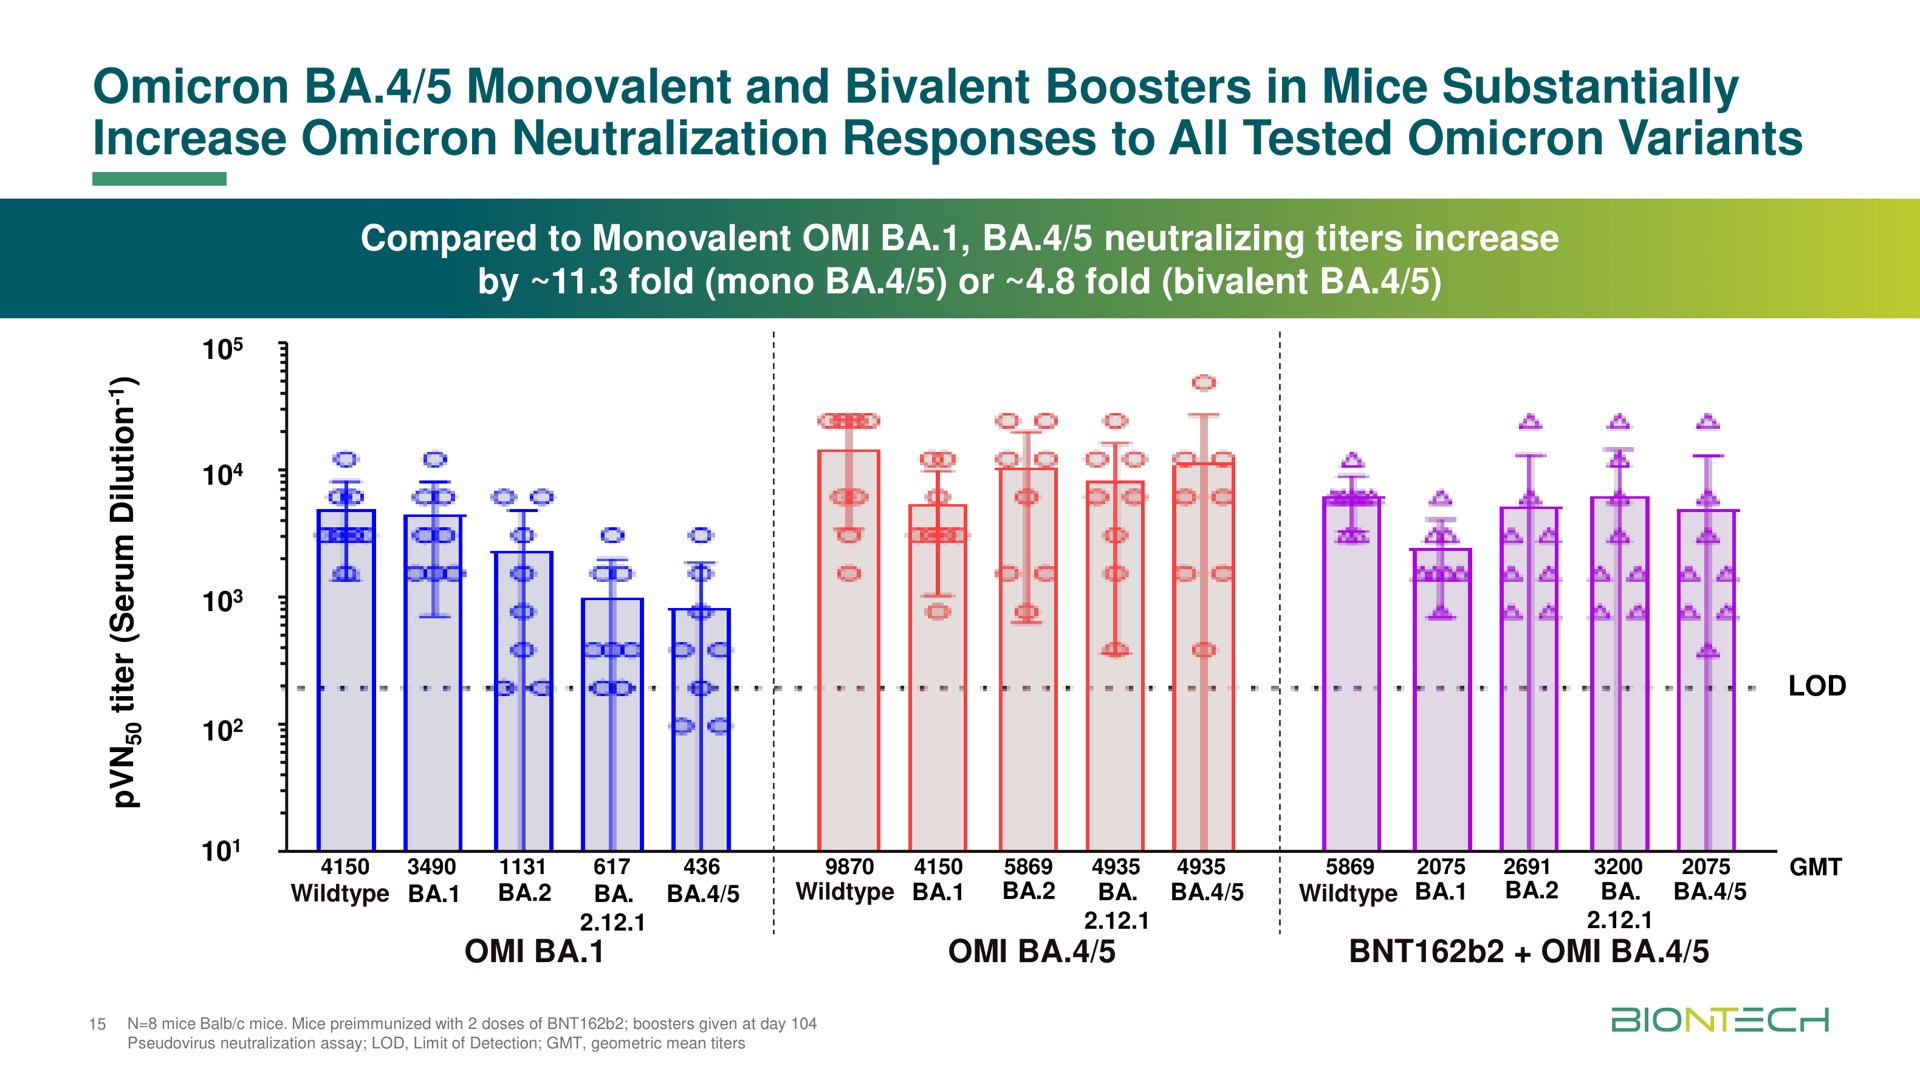 omicron monovalent and bivalent boosters in mice substantially increase omicron neutralization responses to all tested omicron variants lod | BioNTech